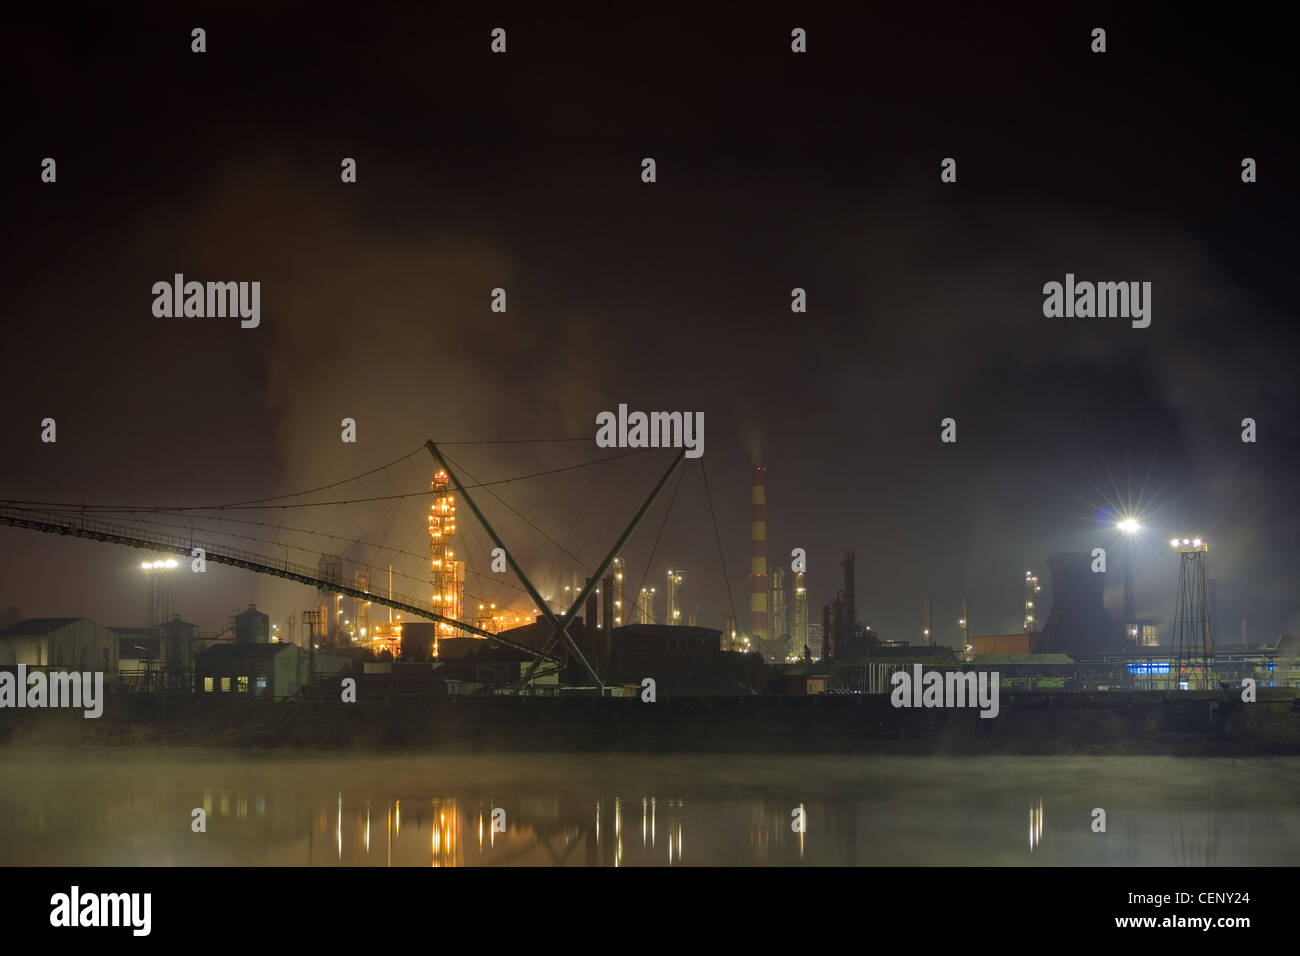 Oil Refinery at Night Stock Photo